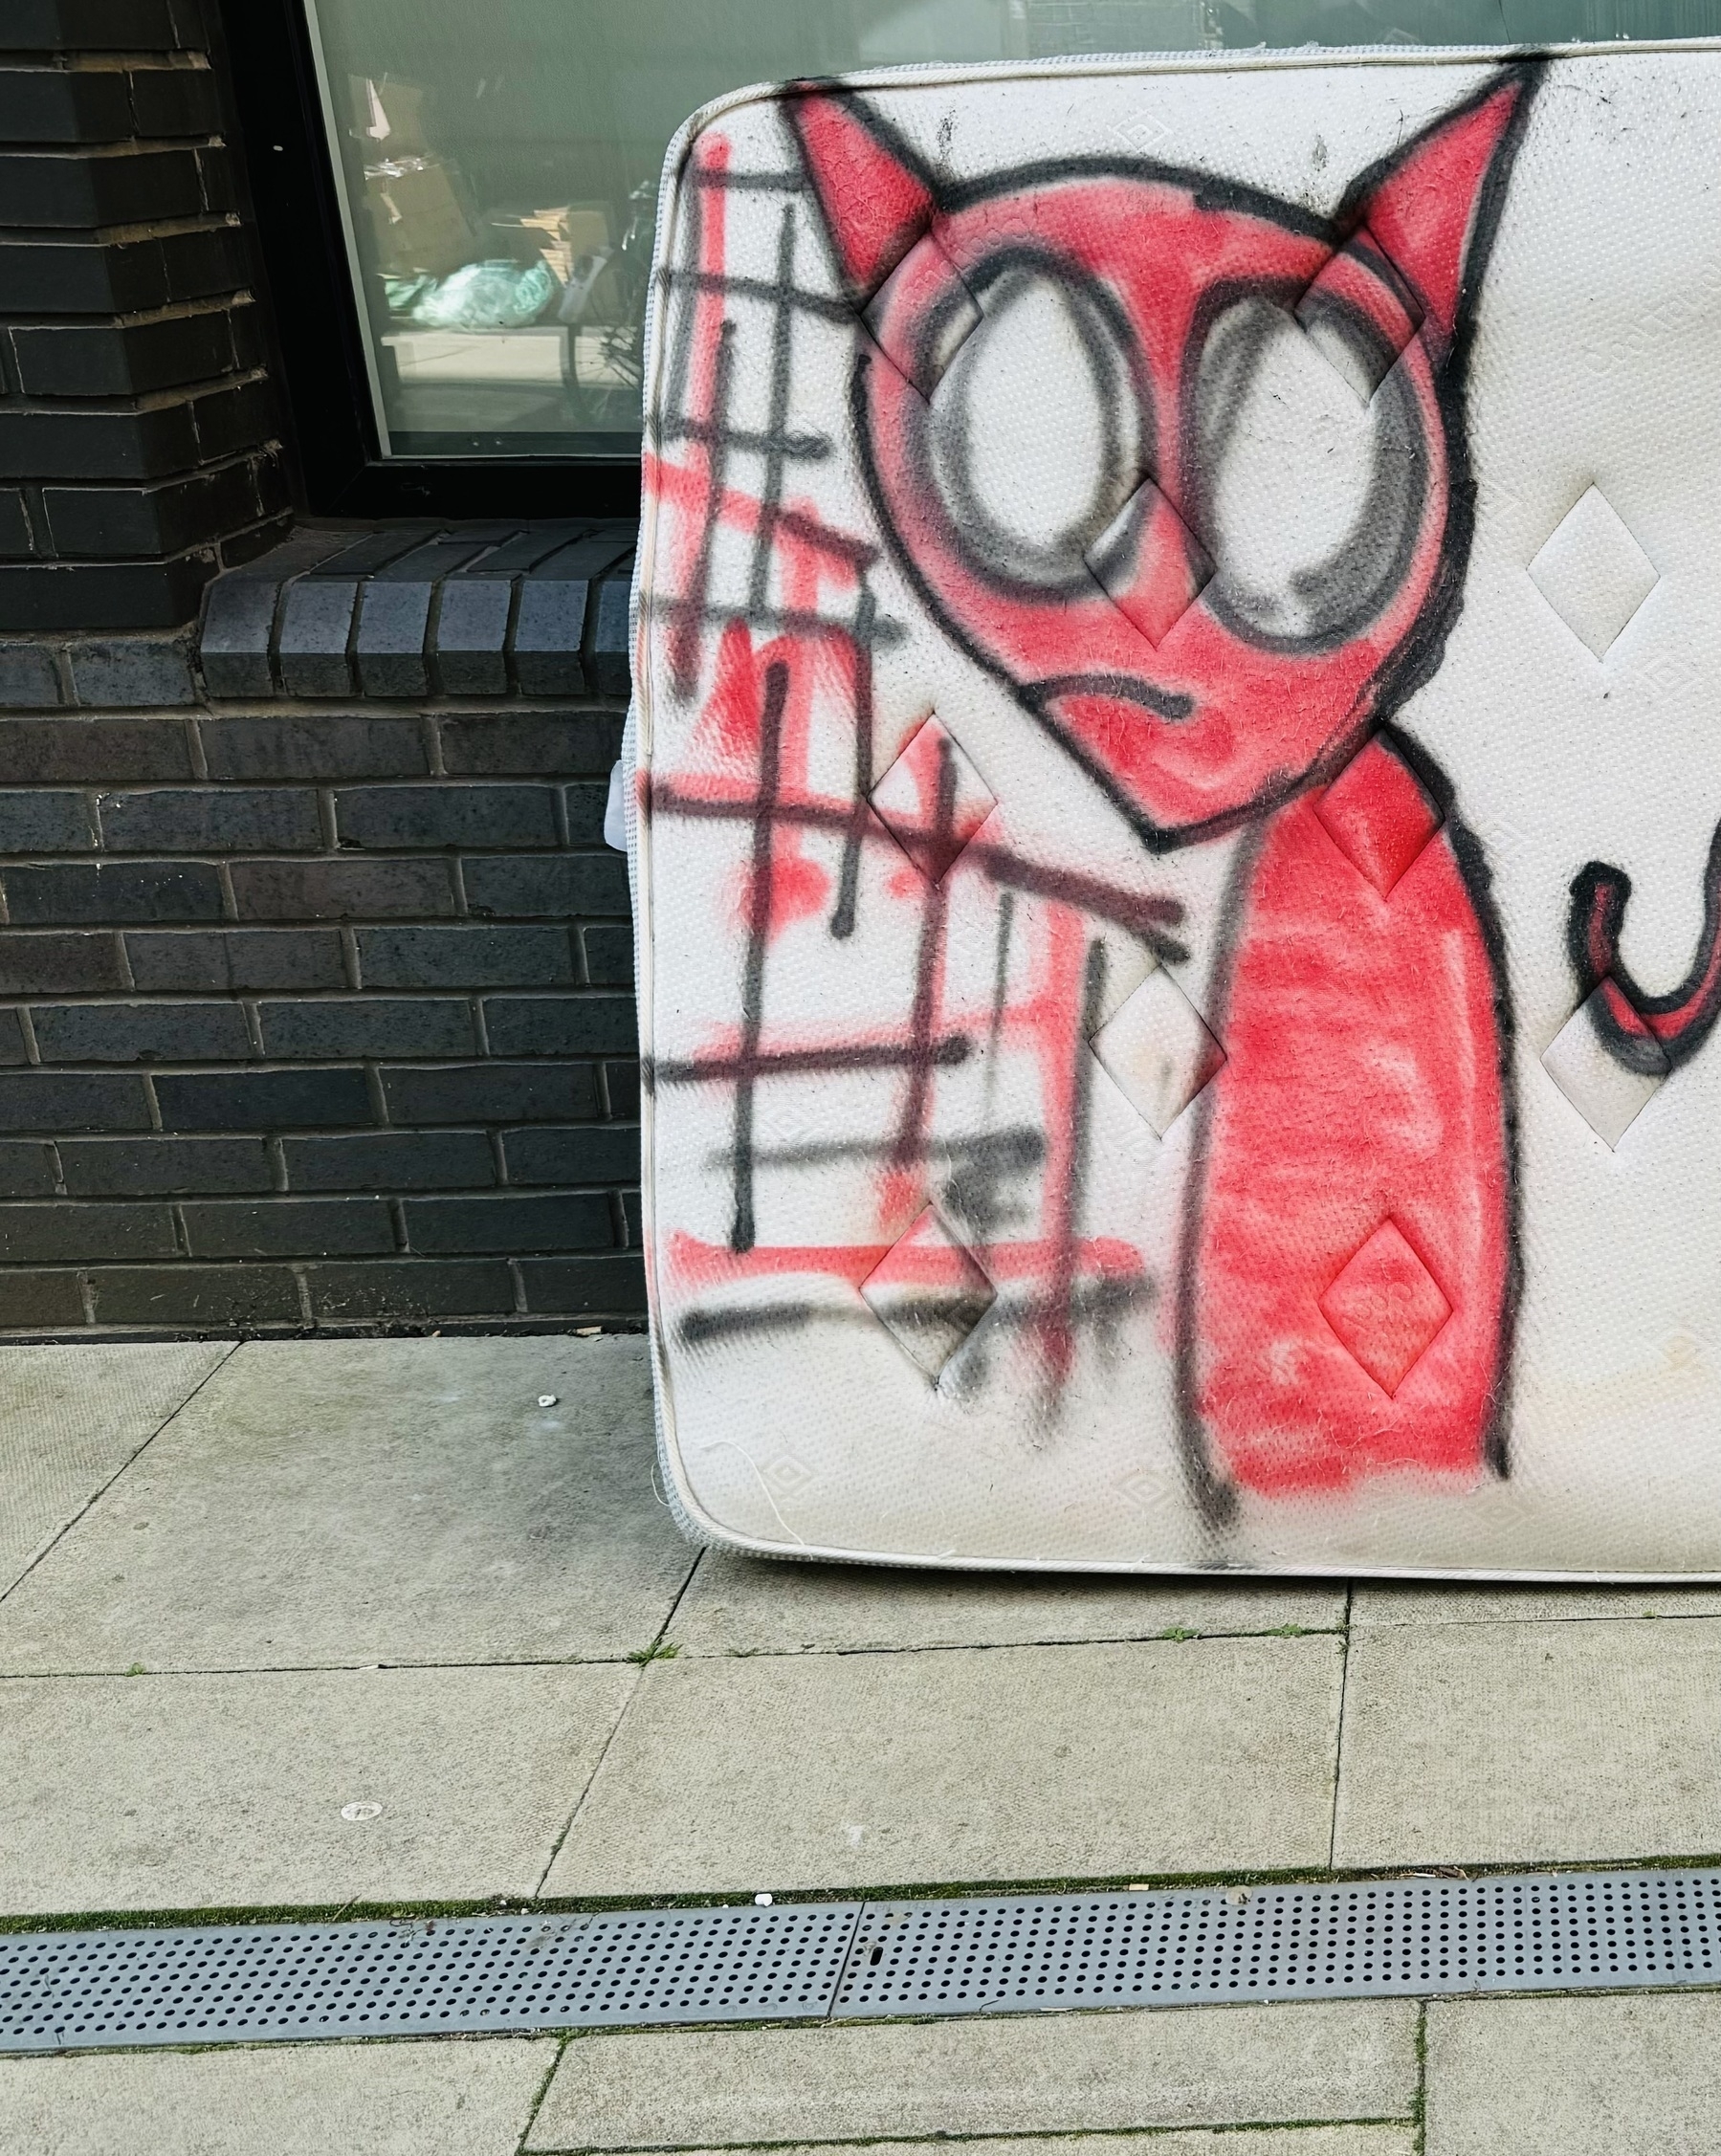 A devil spray painted on an abandoned mattress.